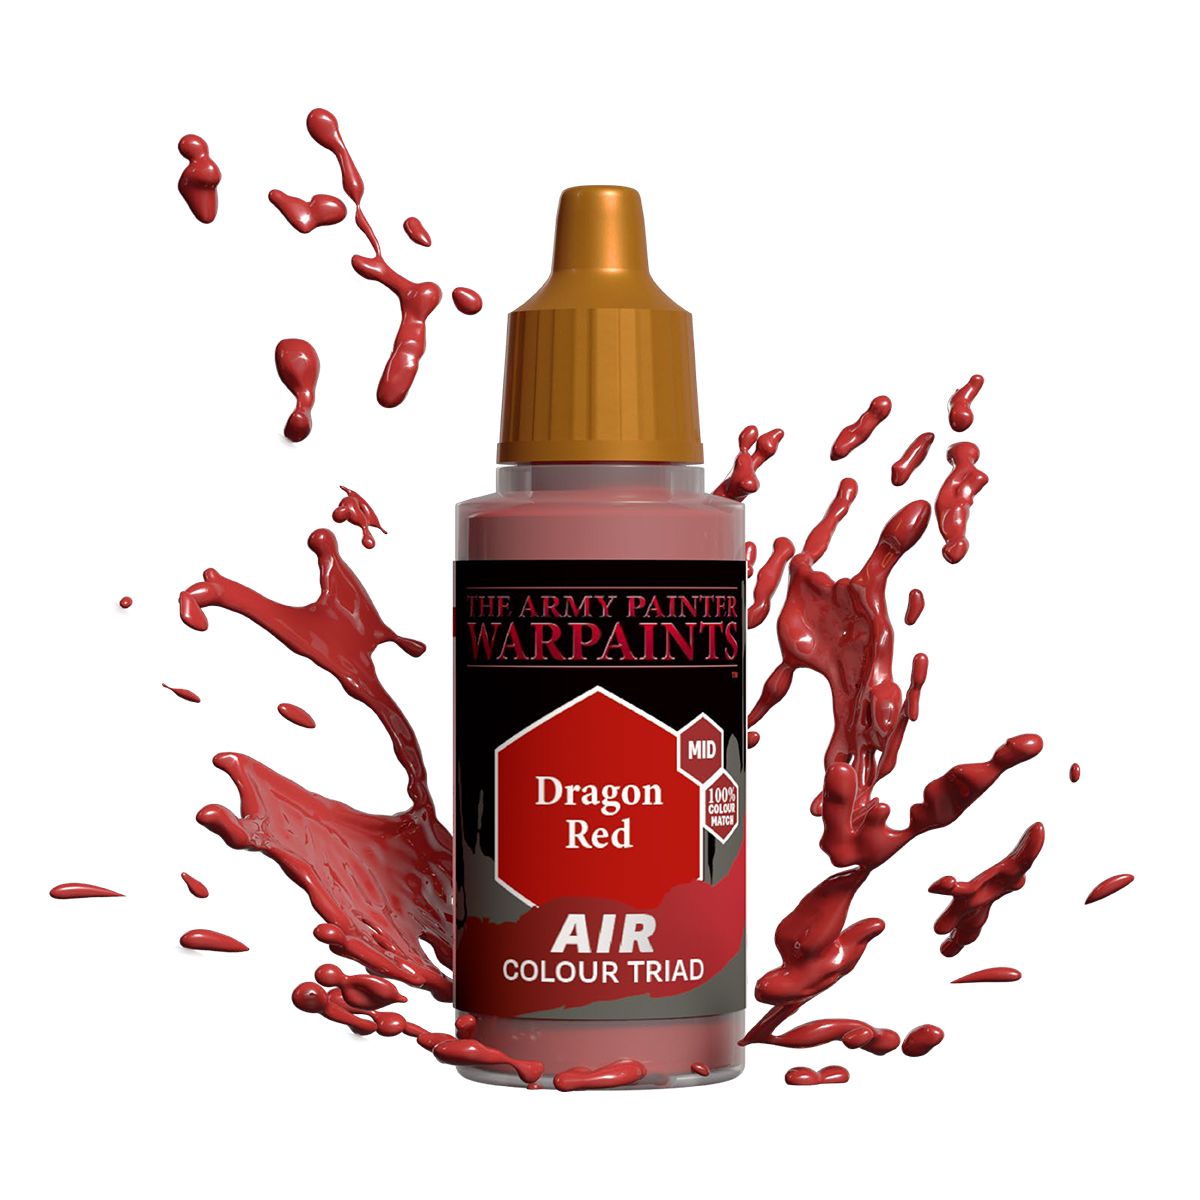 Army Painter Warpaints Air: Dragon Red 18ml